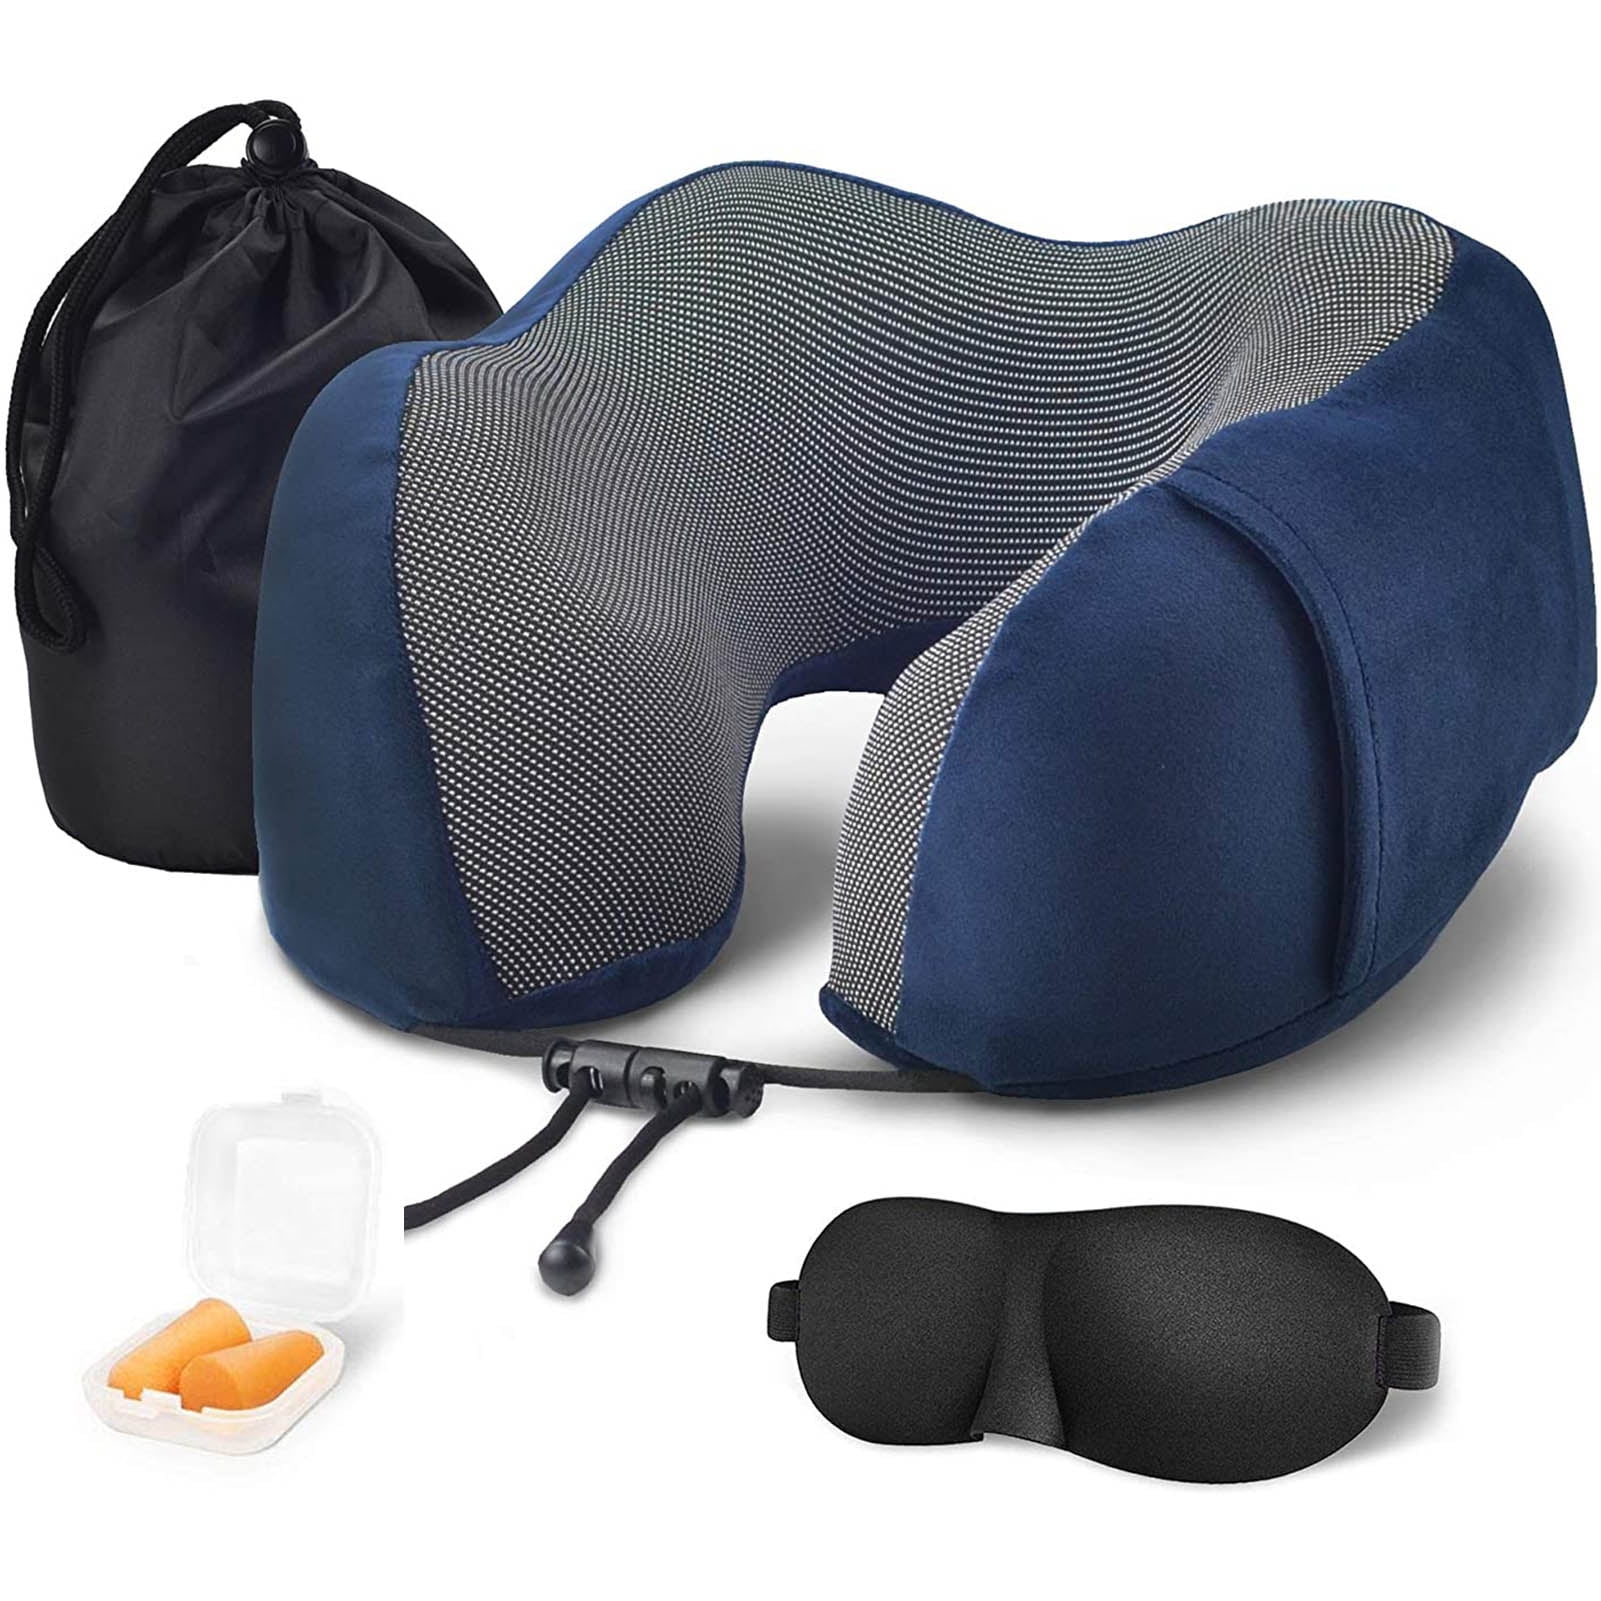 Seat Cushion Travel Neck Pillow Memory Foam Airplane Travel Comfortable  Washable Cover Plane Neck Support Pillow for Neck Sleeping Cloth Navy